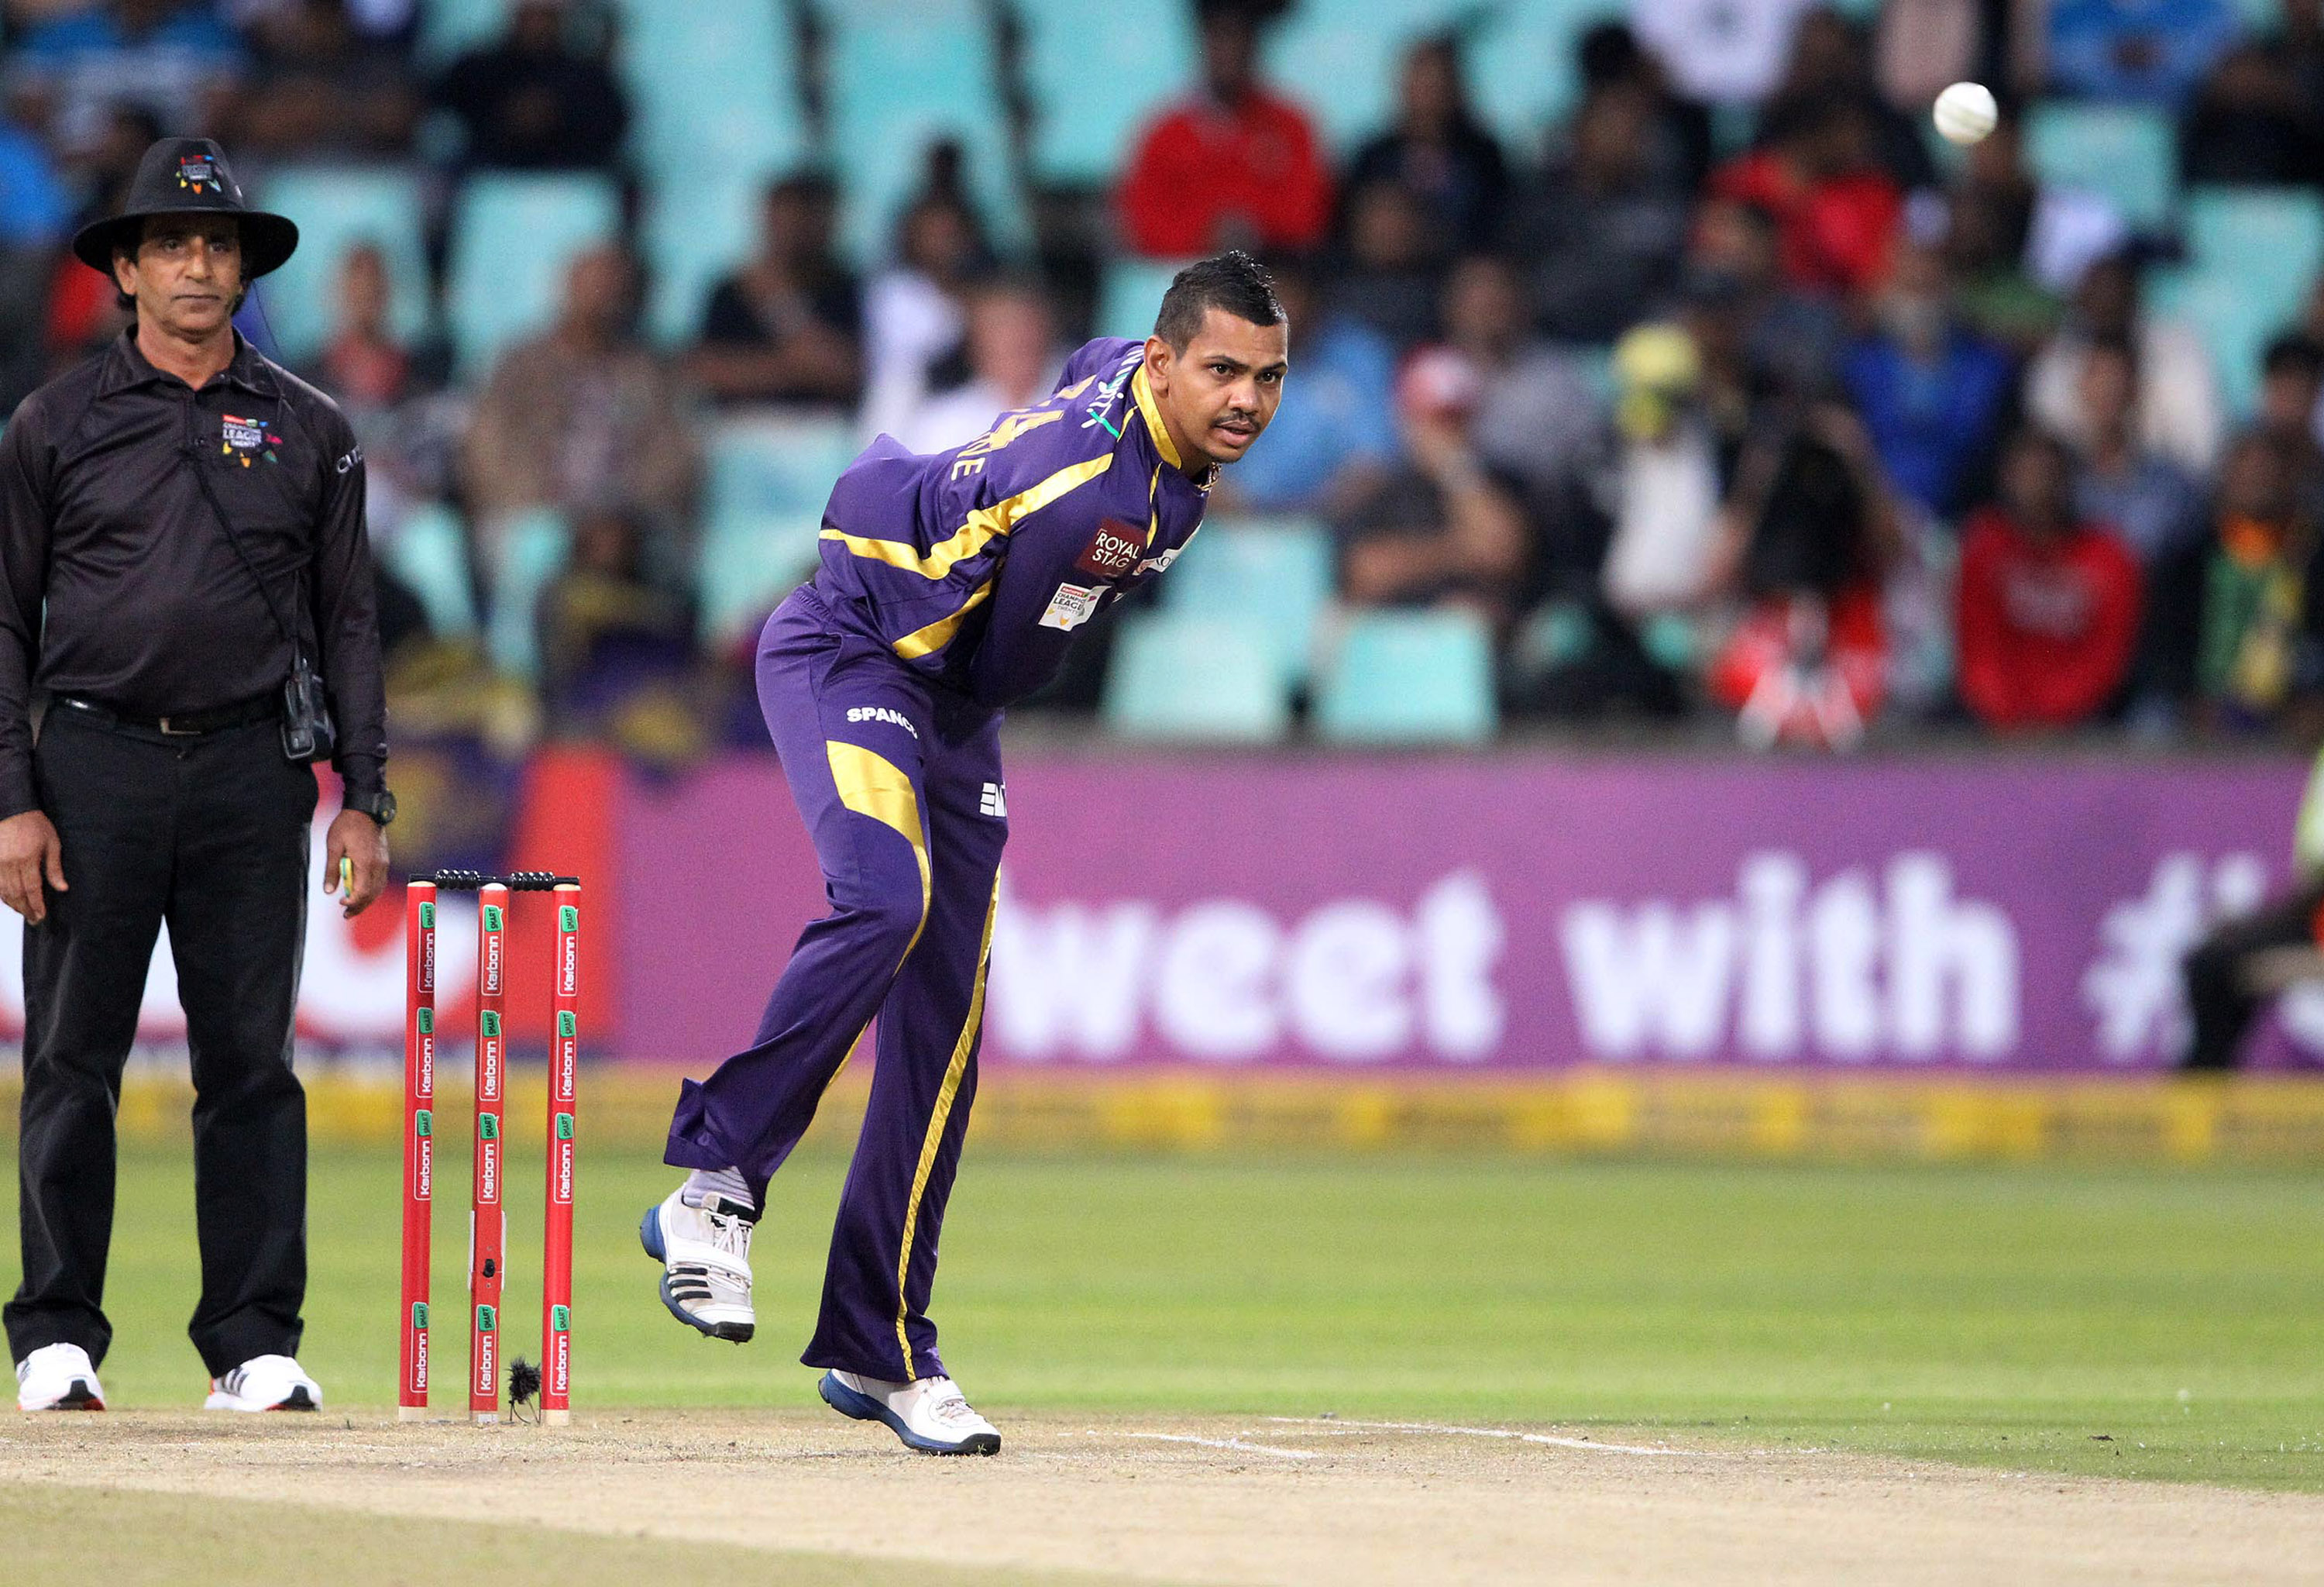 Surrey signs Sunil Narine for the upcoming Vitality T20 Blast